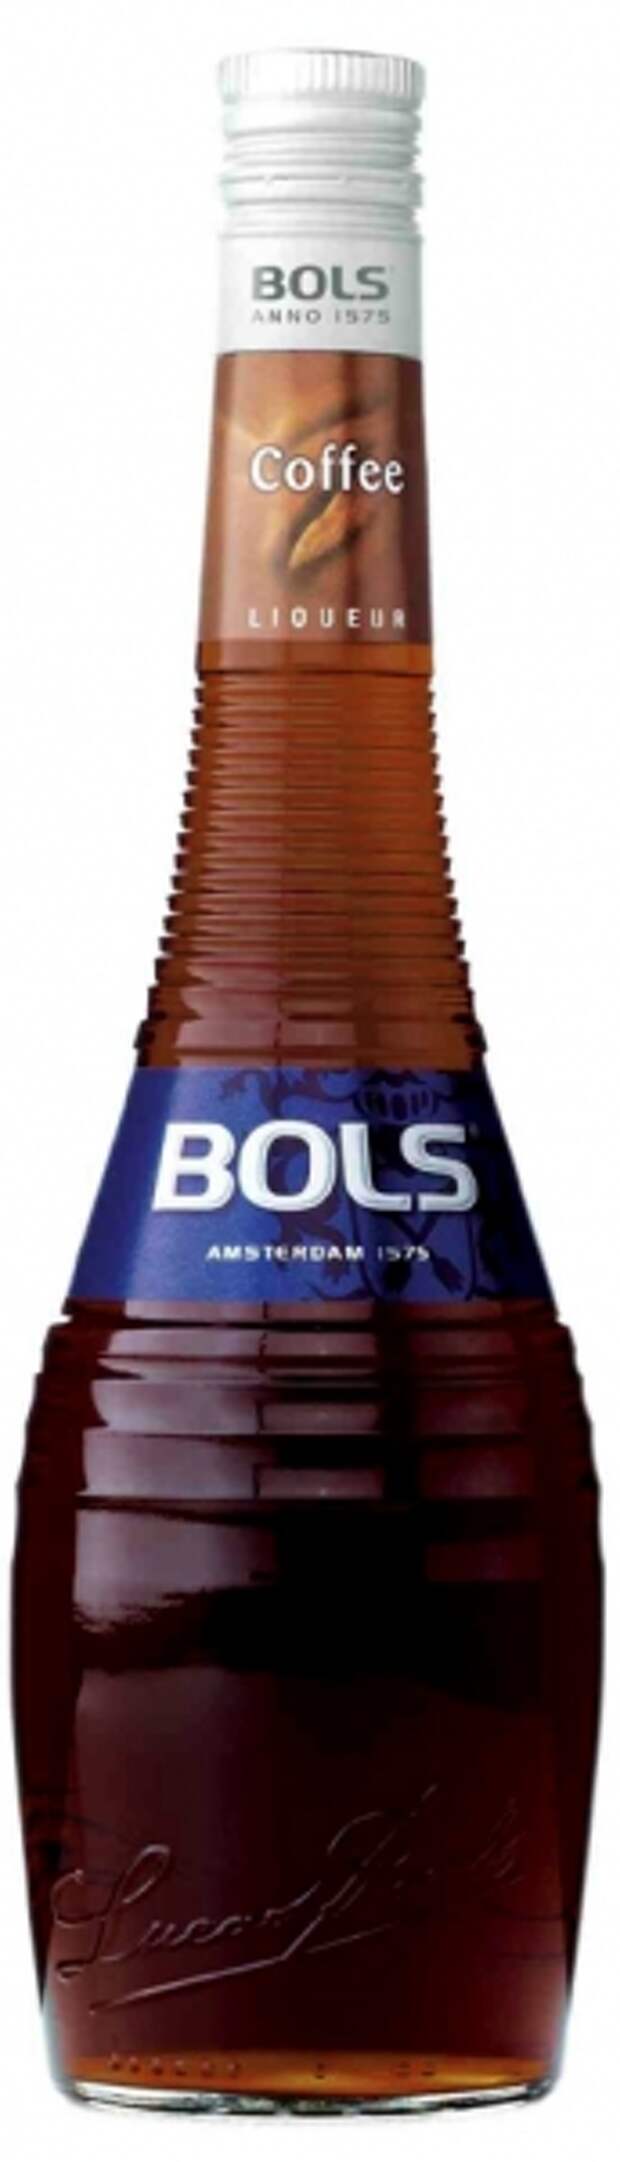 http://winestyle.ru/product_images_new/f/bols_coffee__19384_big.jpg